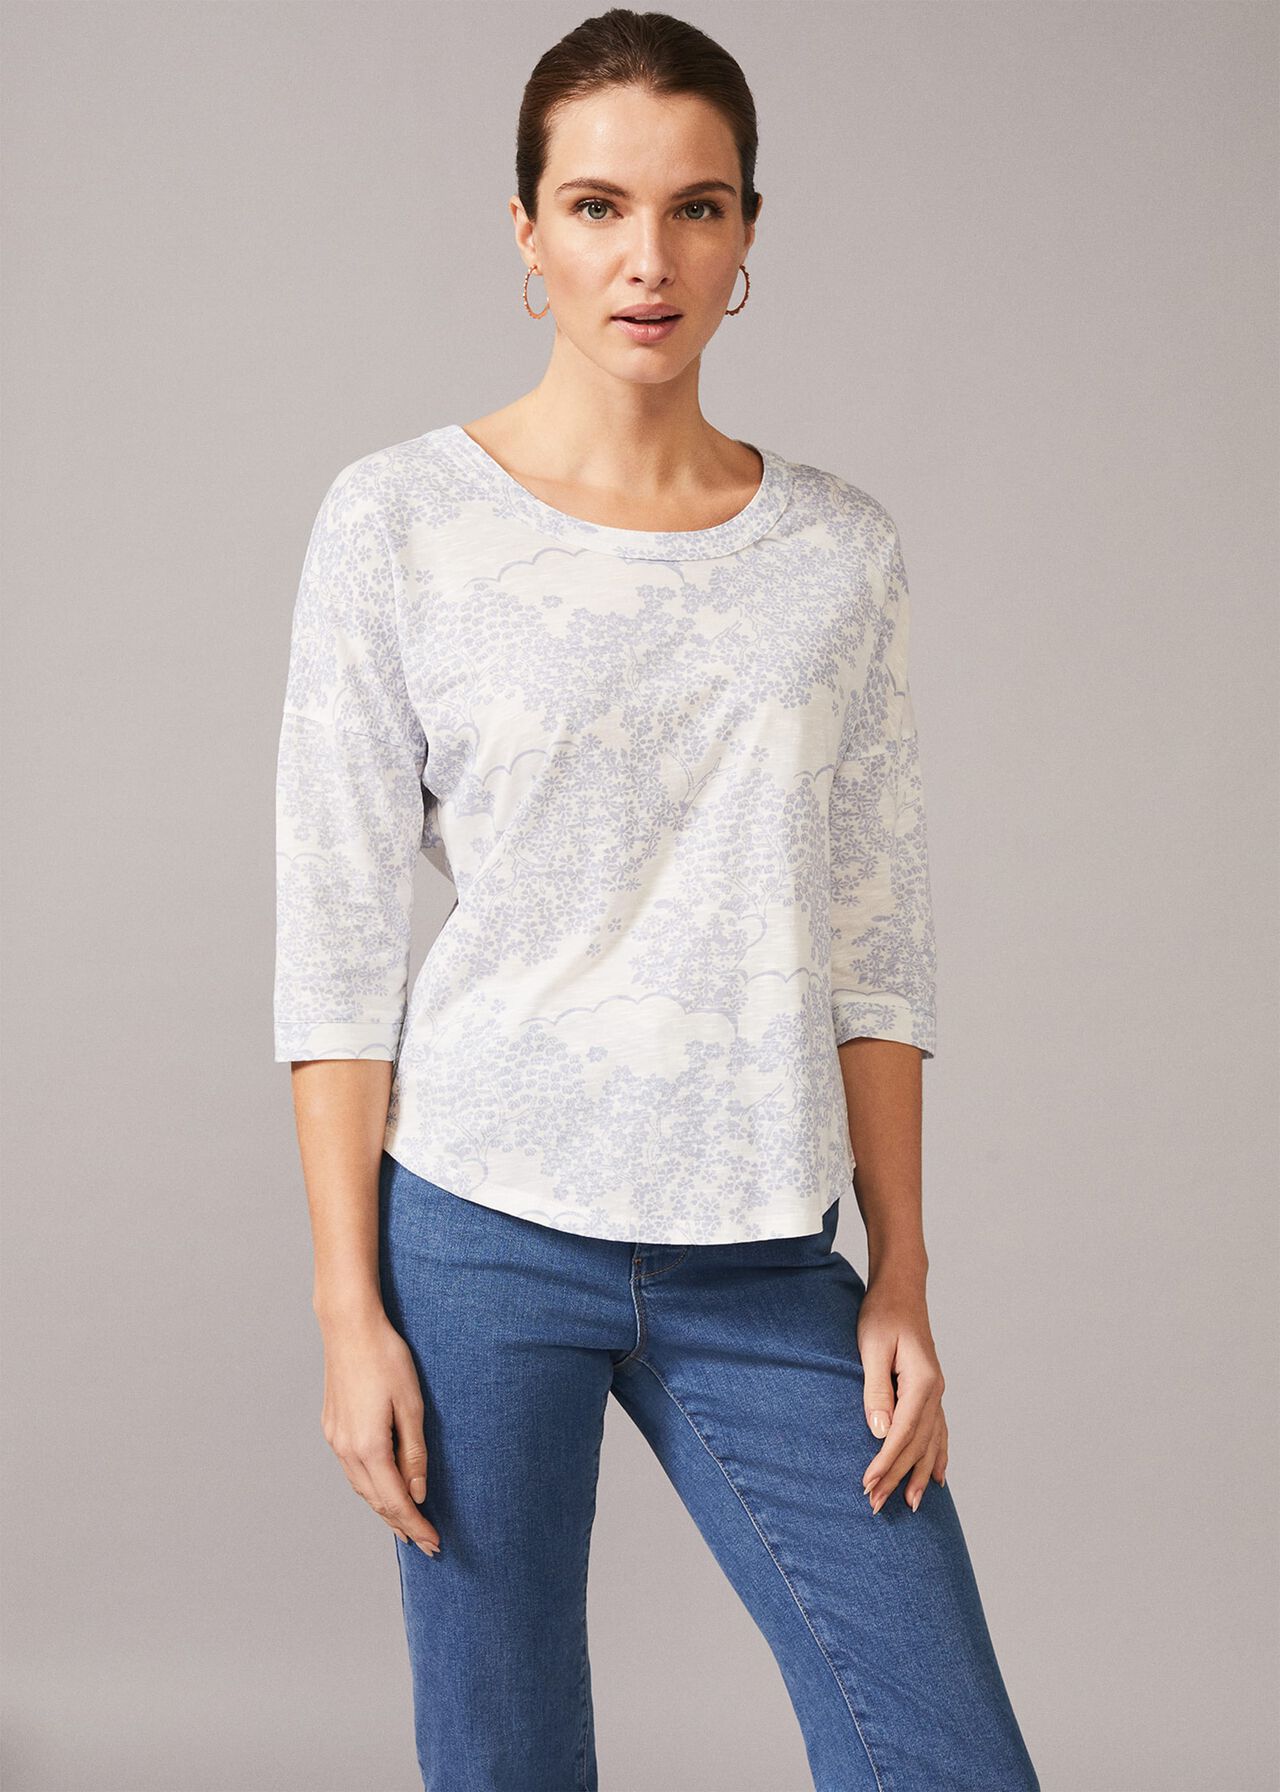 Belle Pagoda Print Top | Phase Eight